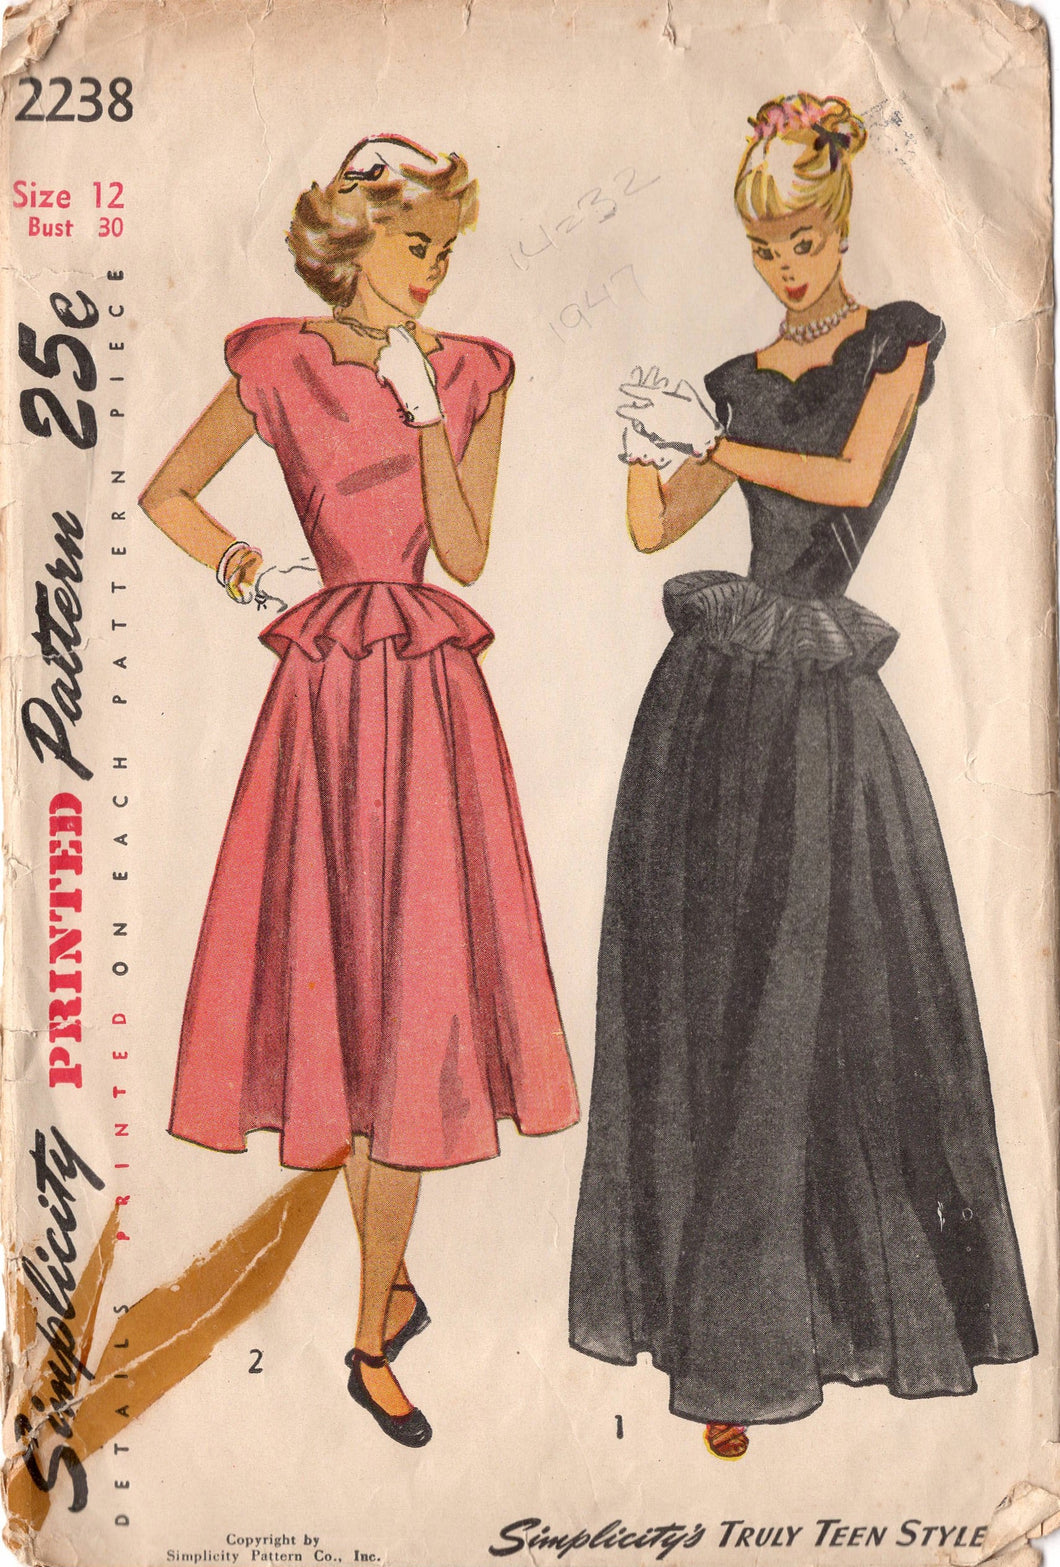 1940's Simplicity One Piece Dress with Scallop Neckline, Full Skirt and Peplum - Bust 30